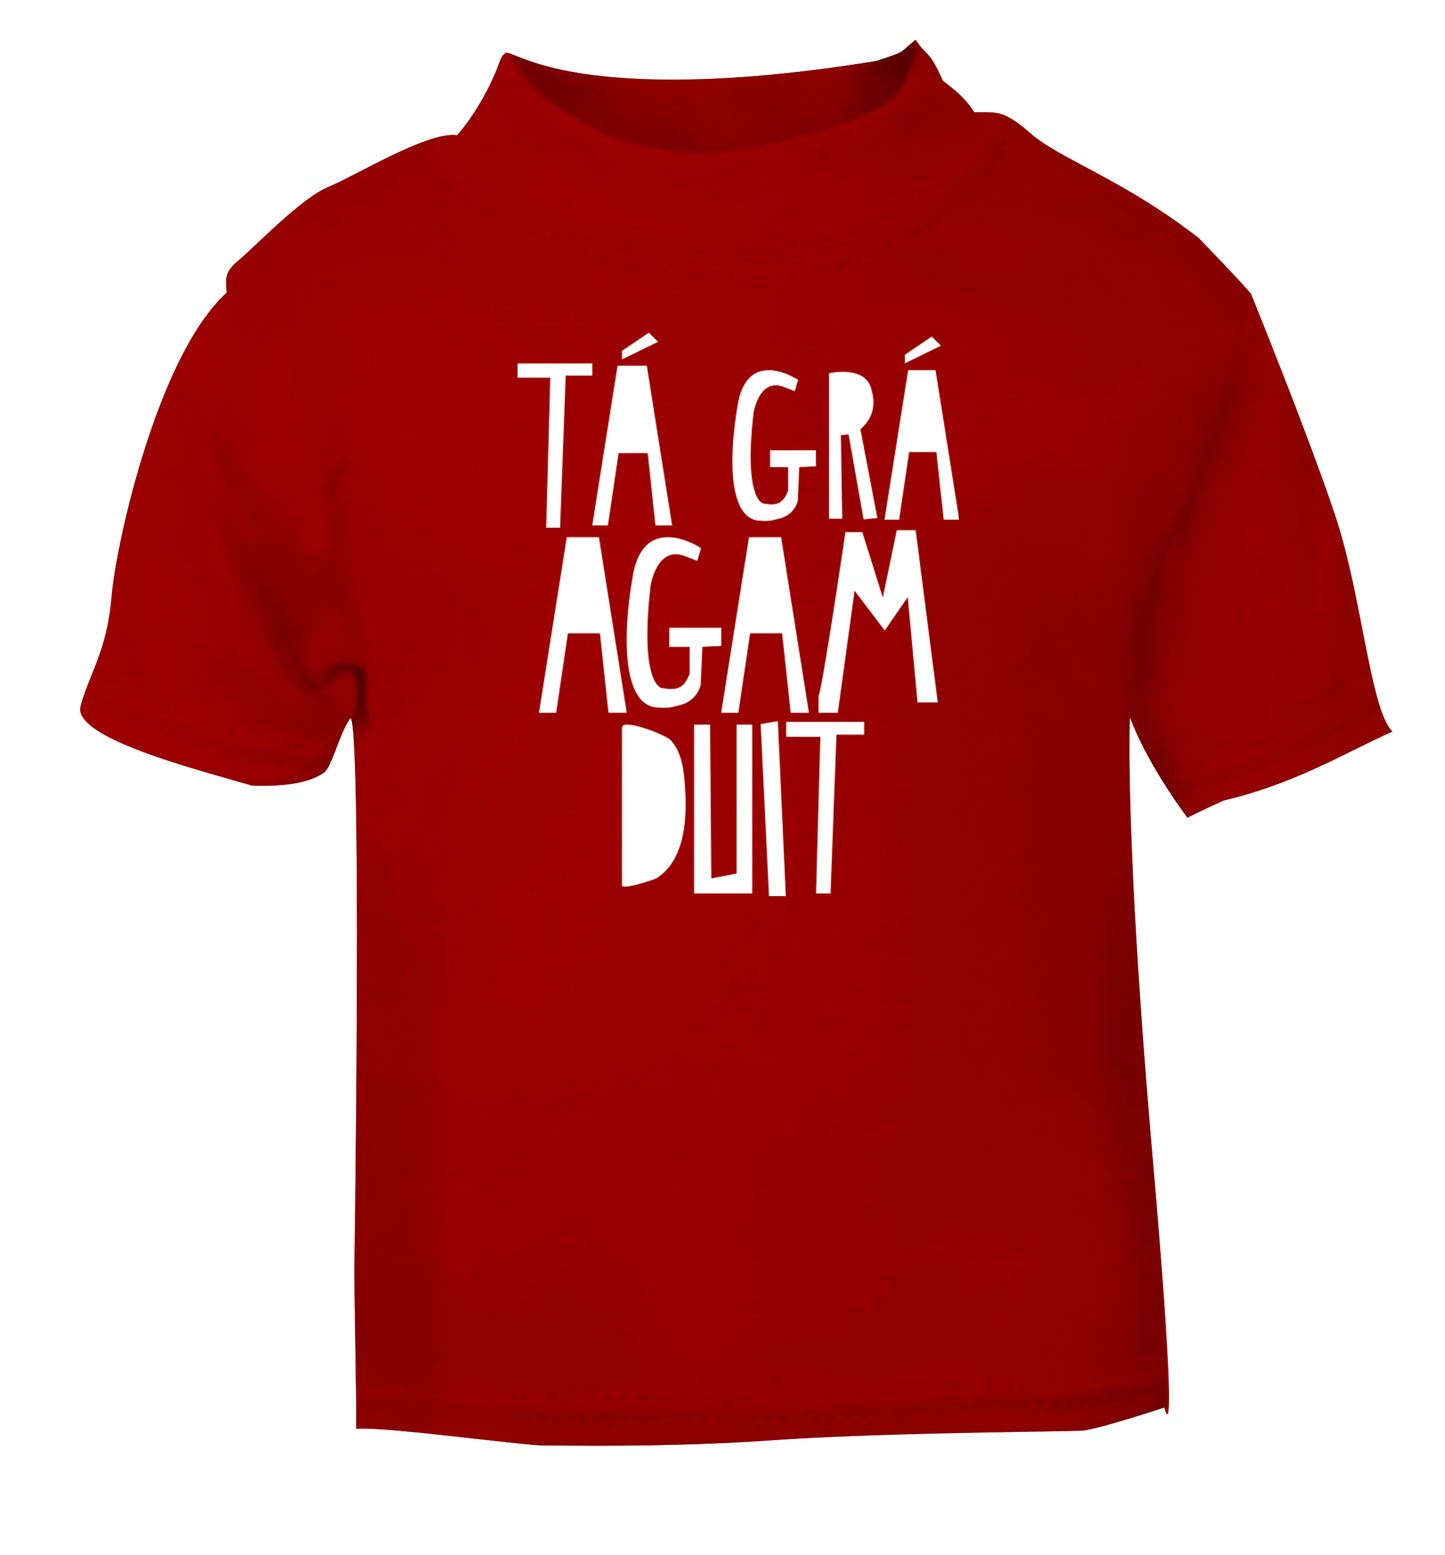 T‡ gr‡ agam duit - I love you red Baby Toddler Tshirt 2 Years